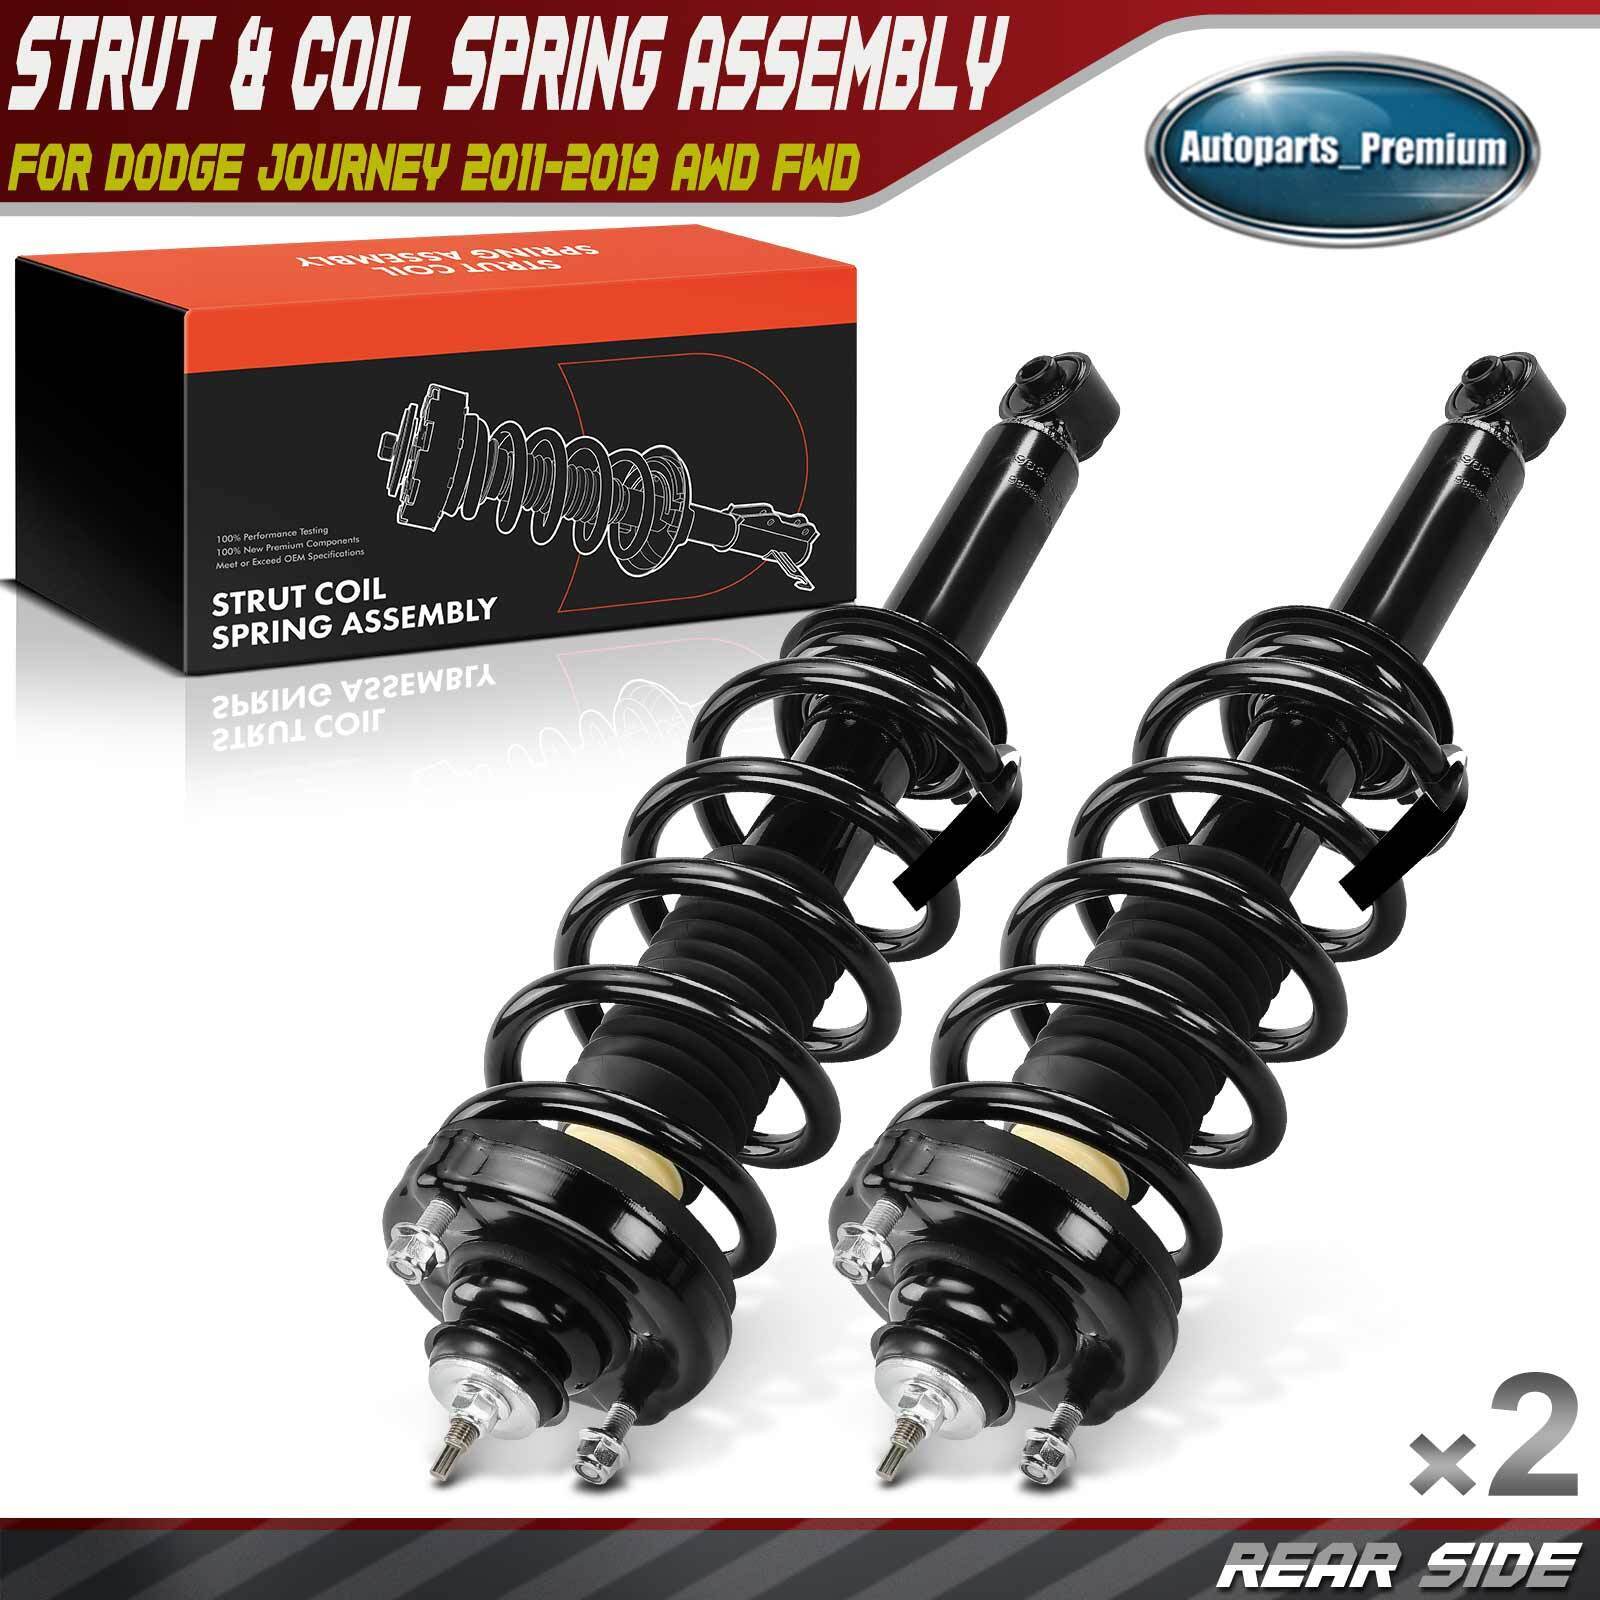 2x Rear Complete Strut &Coil Spring Assembly for Dodge Journey 2011-2019 AWD FWD